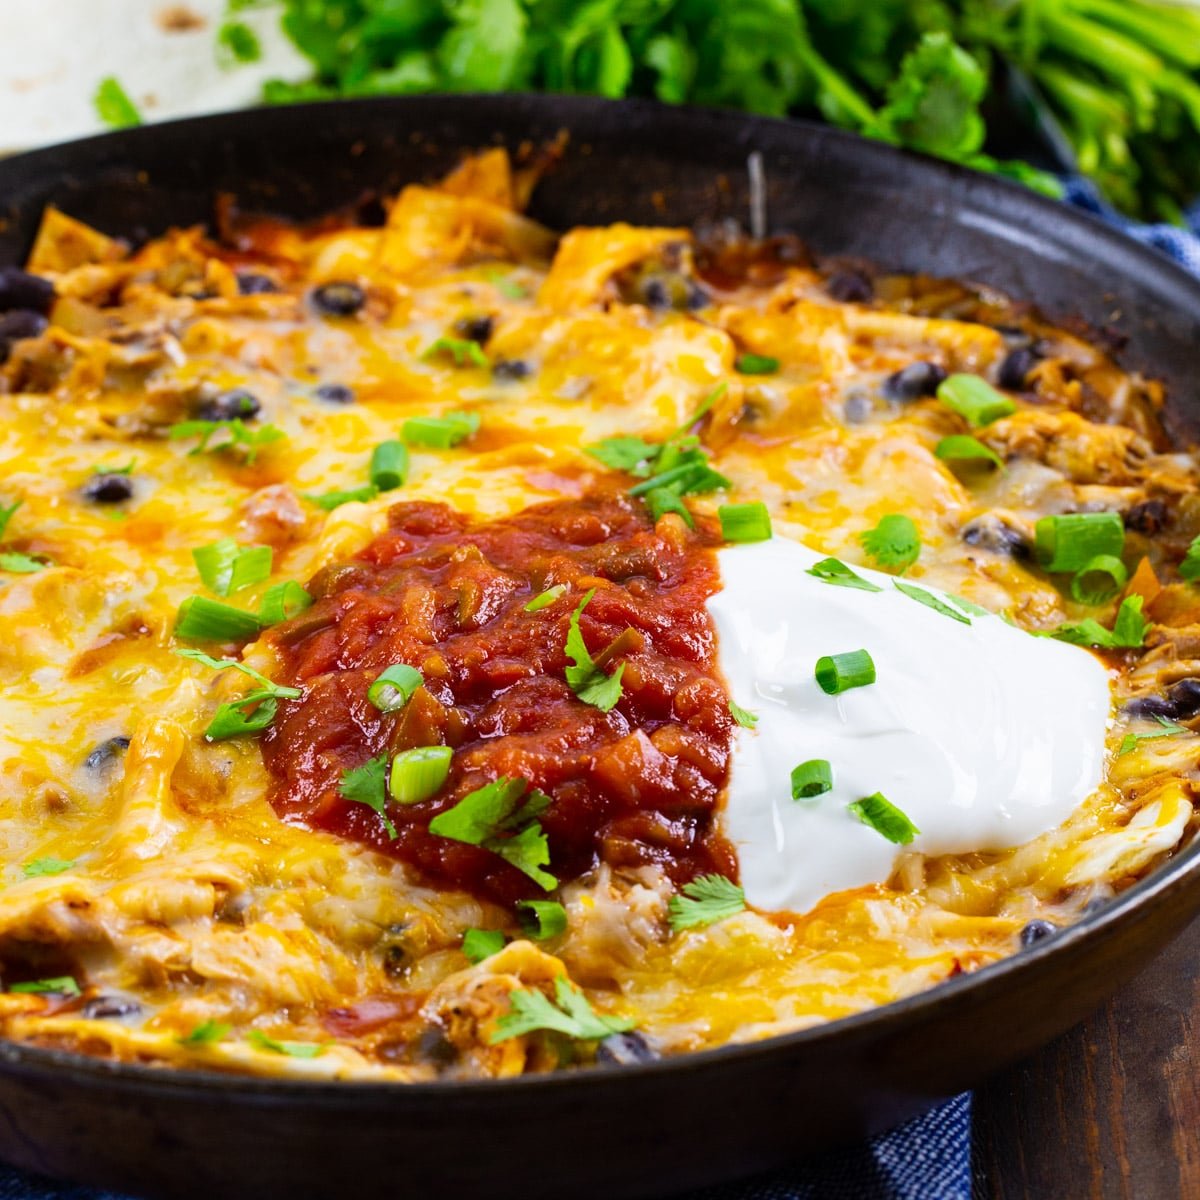 Chipotle Chicken Enchilada Skillet topped with sour cream and salsa in a skillet.